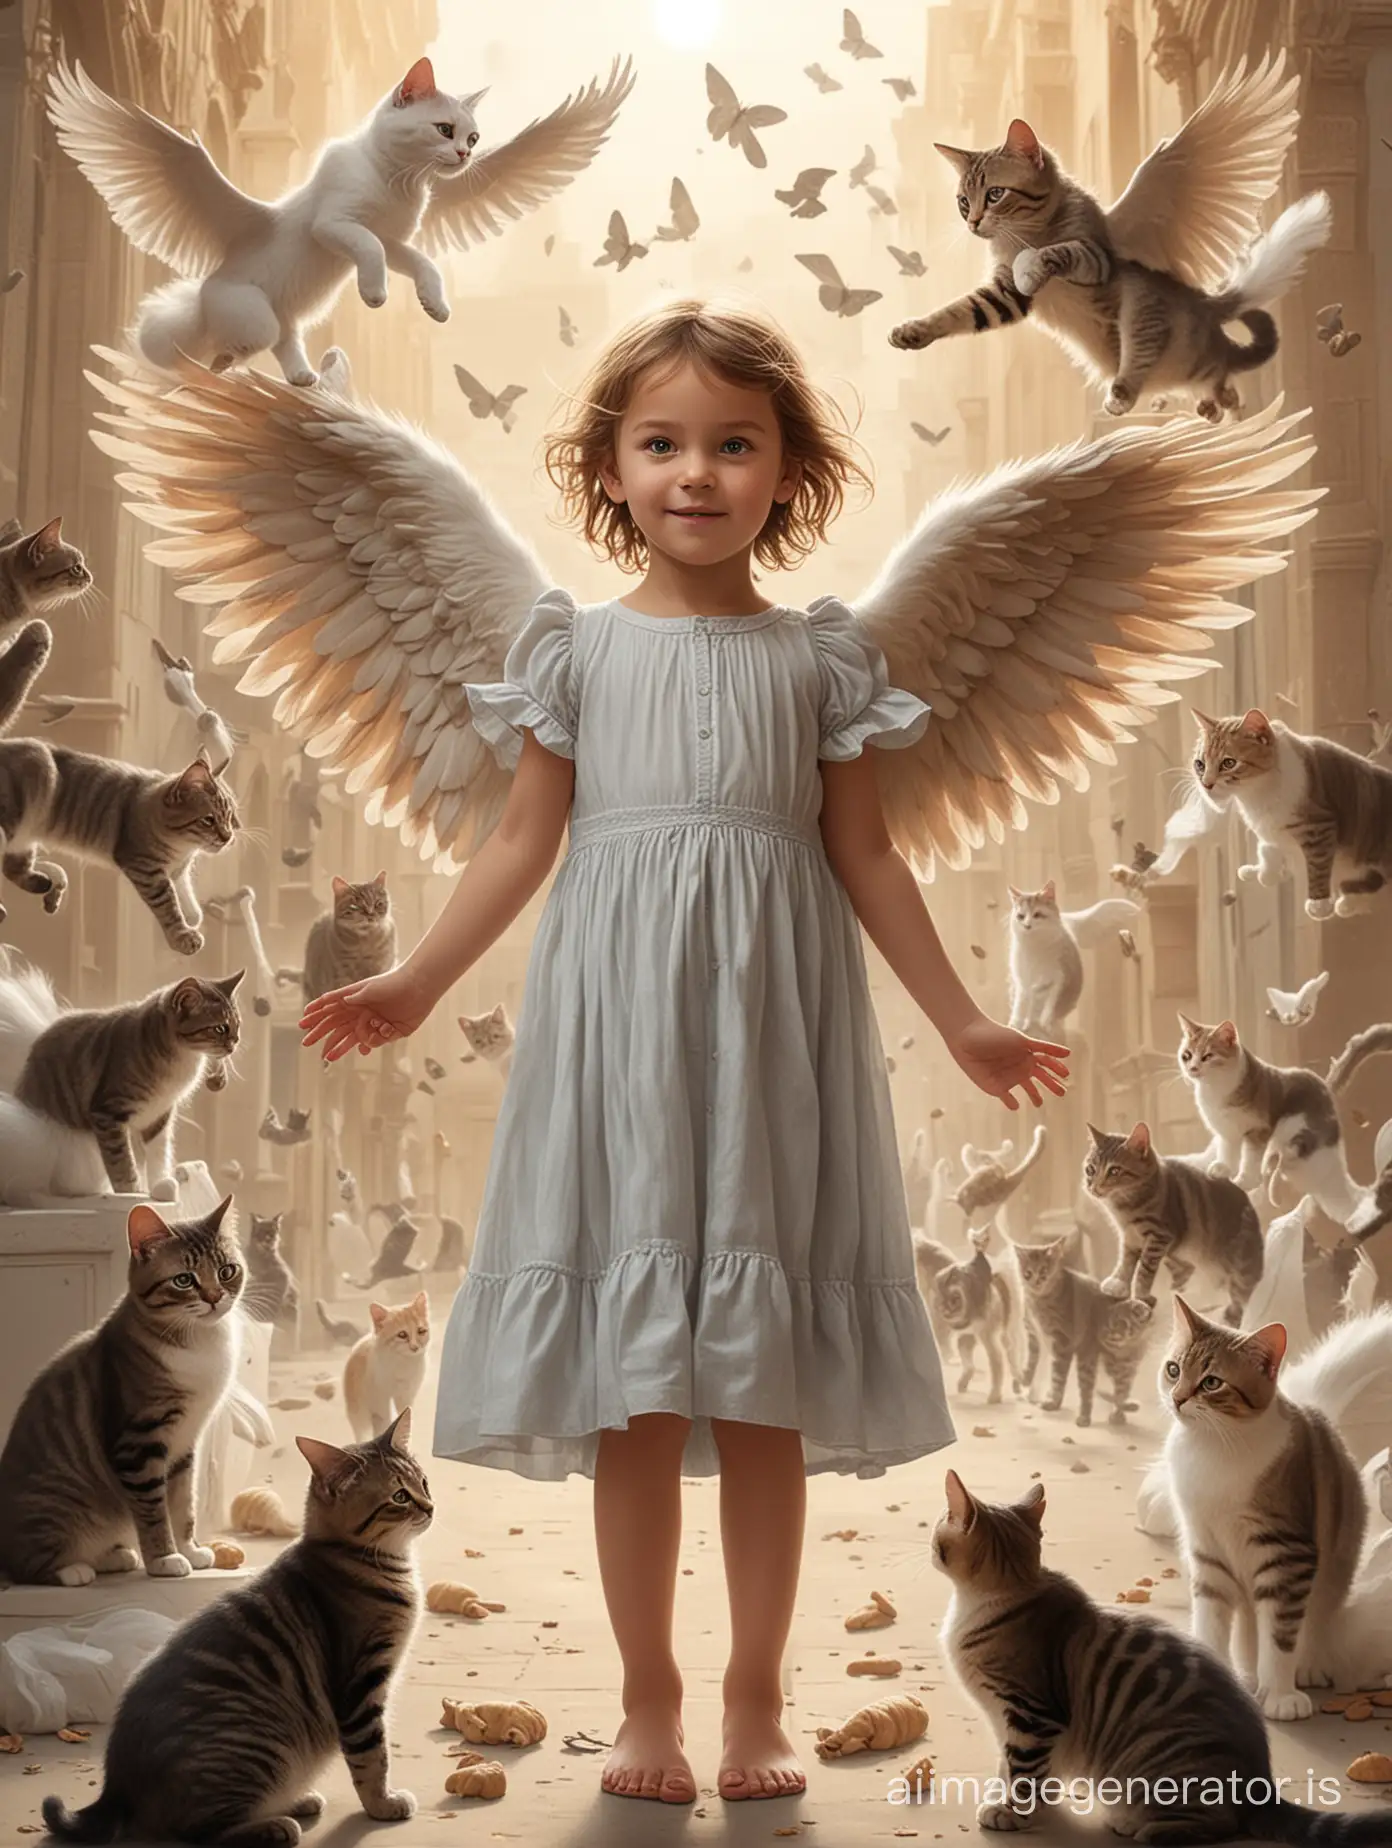 A child has wings and surrounded by cats